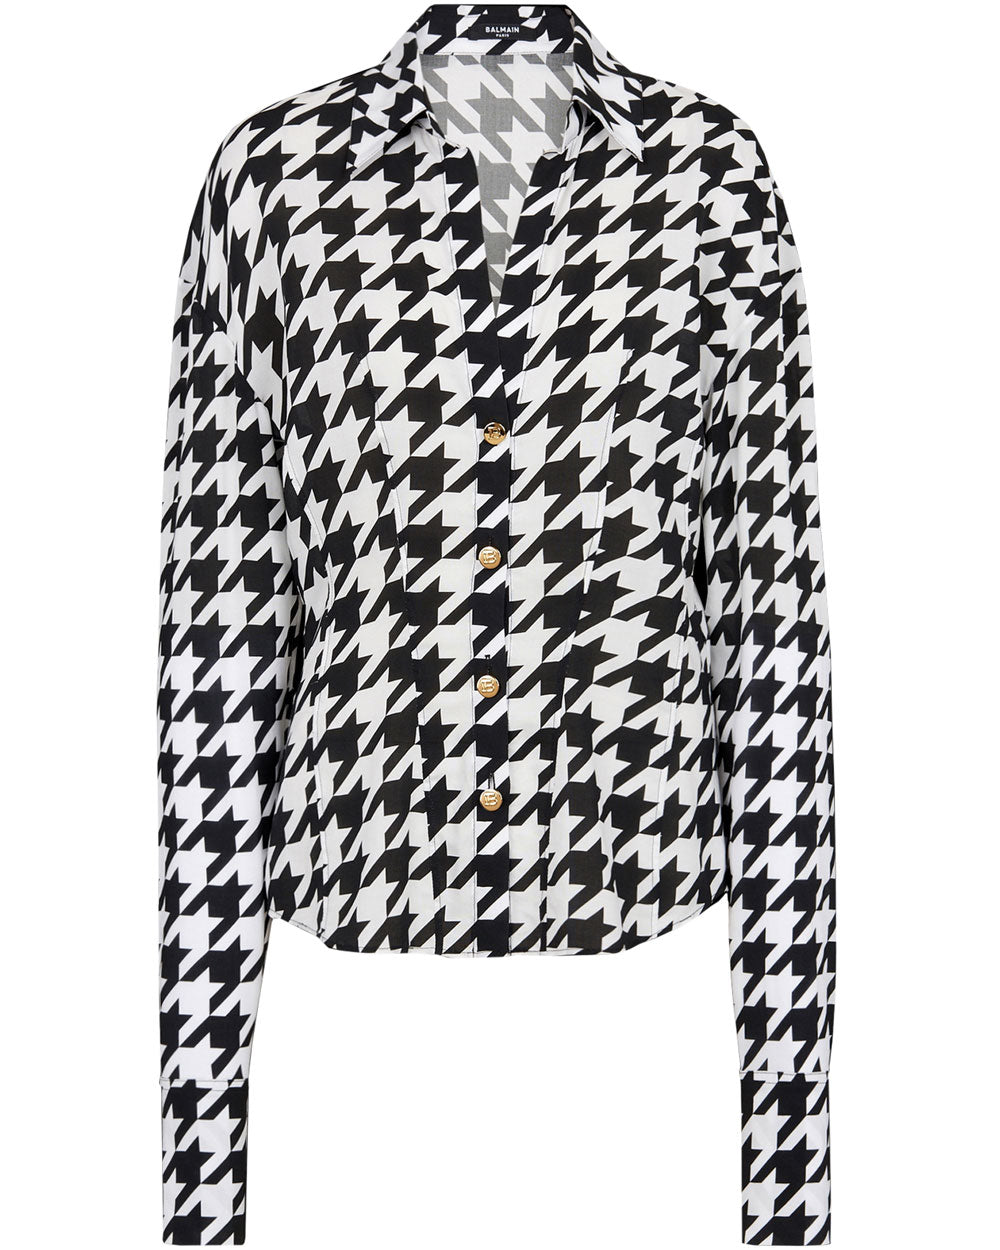 Noir and Blanc Houndstooth Shirt